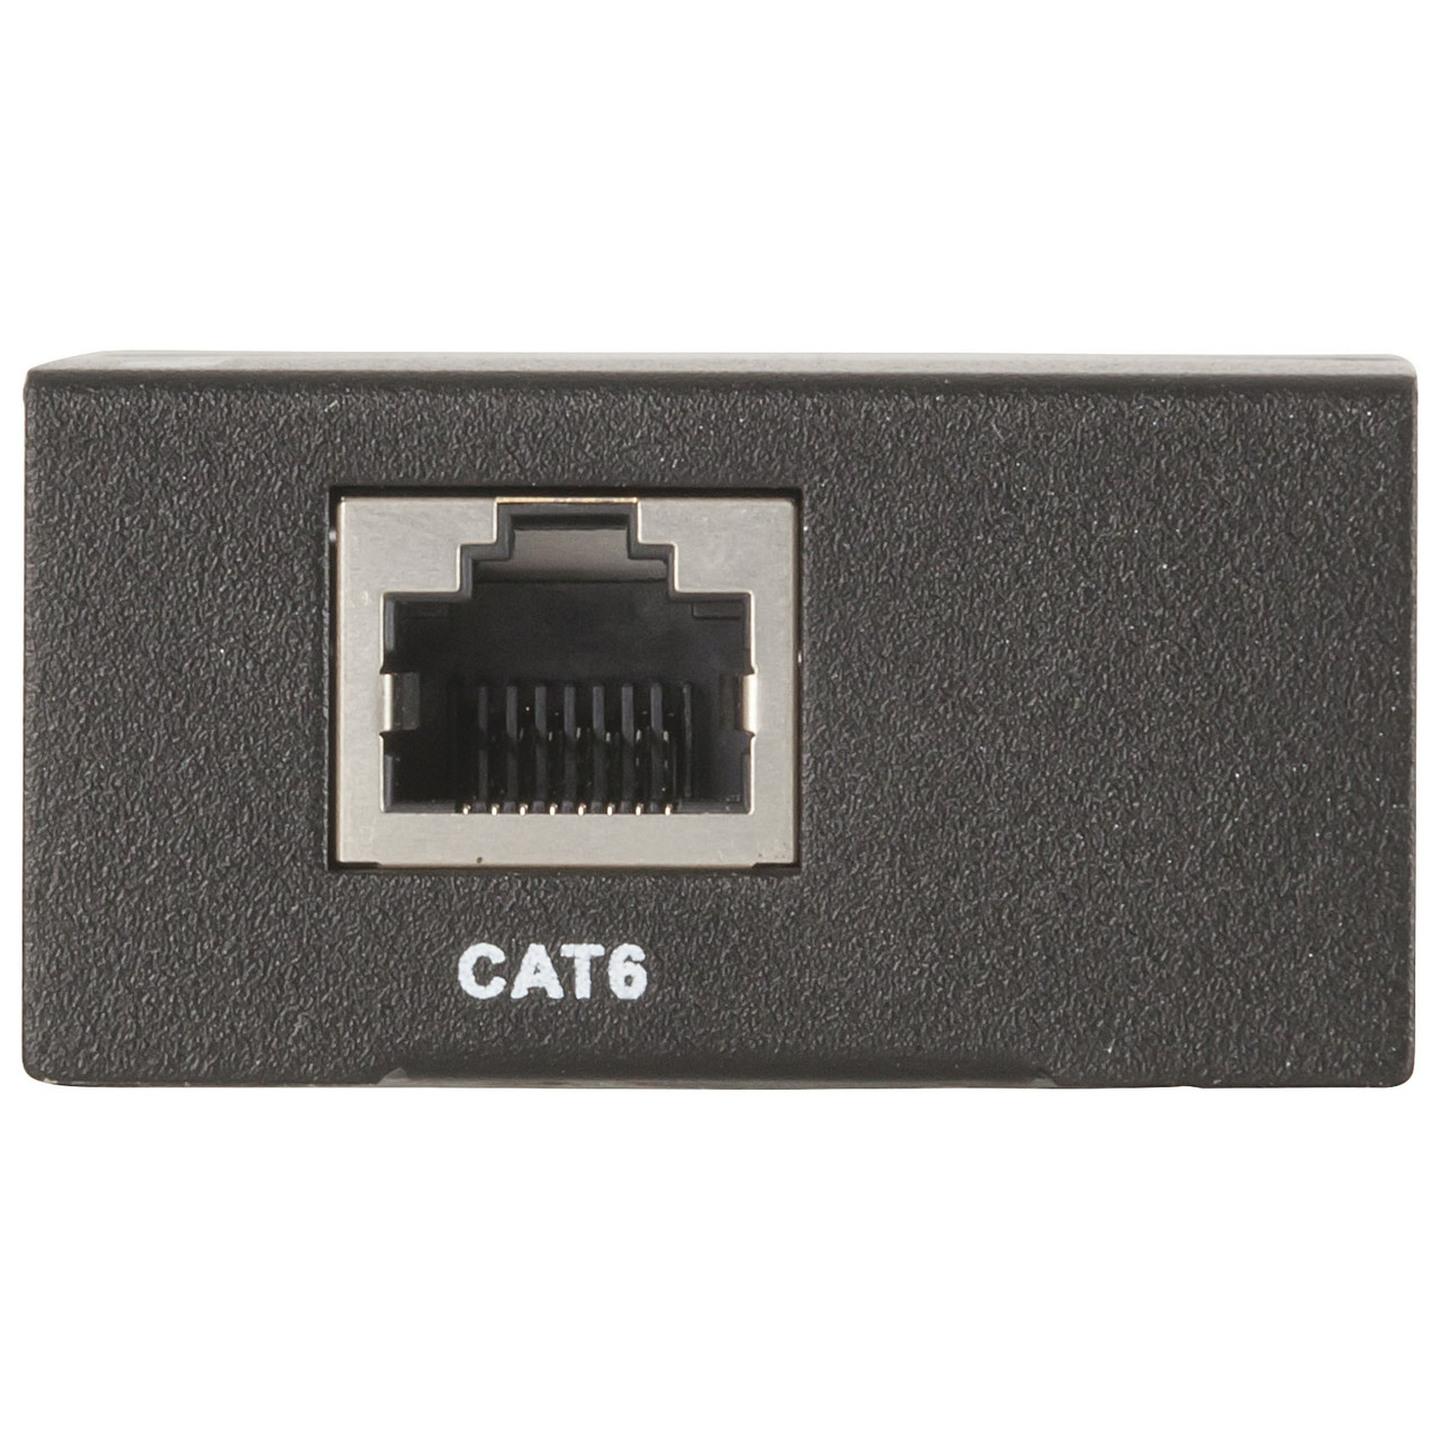 HDMI Over Single Cat6 Extender